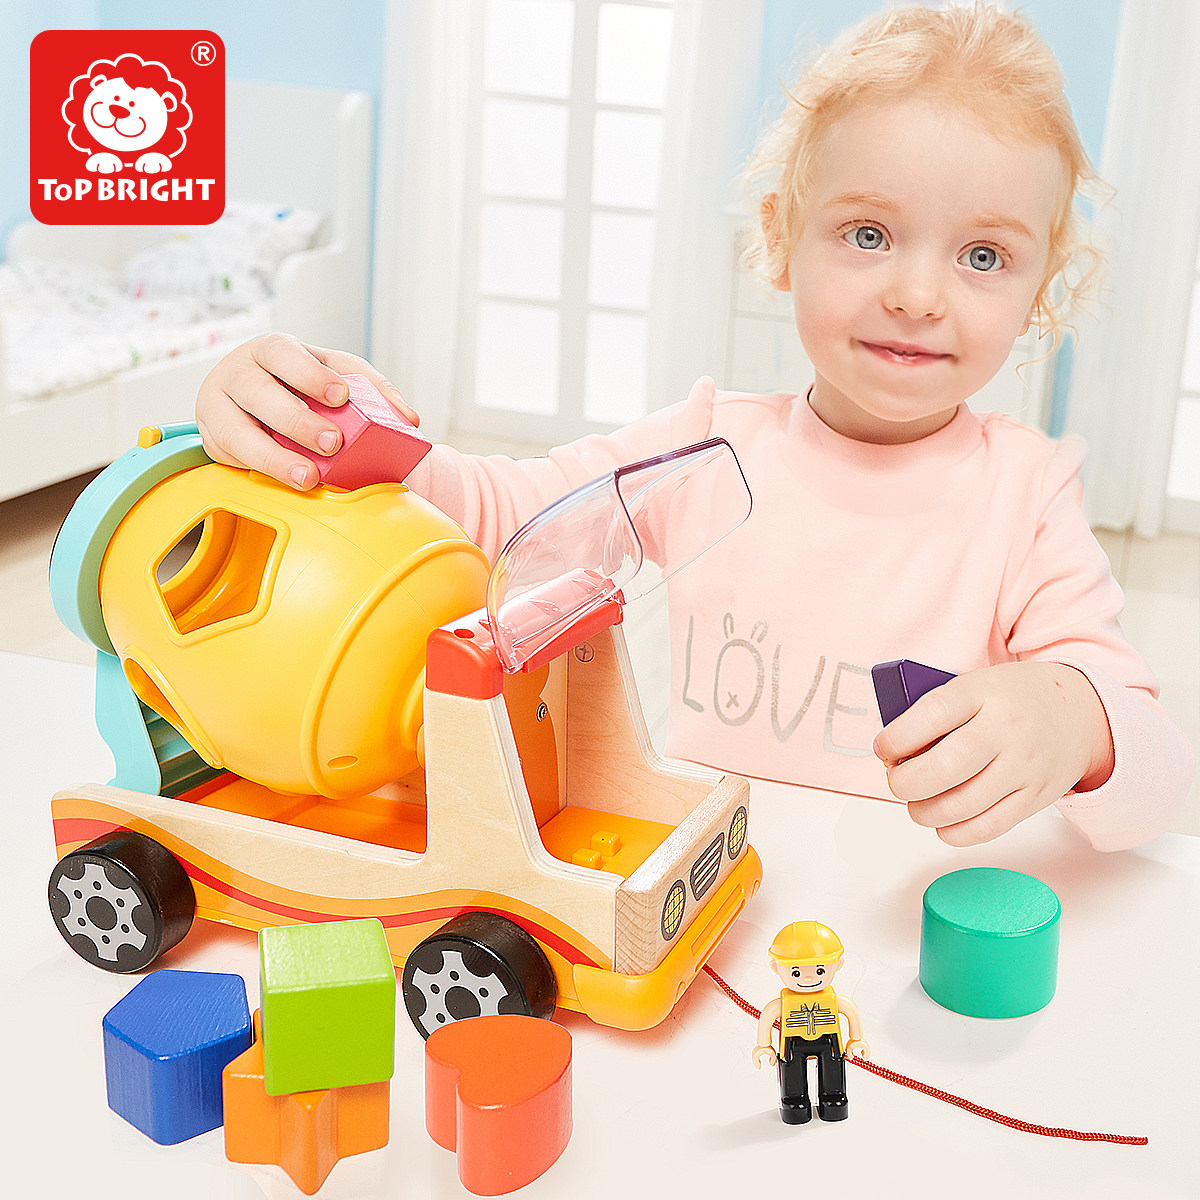 Top Bright - Mixer Truck with Shape Sorter for Toodlers Preschool Learning Toy - image 4 of 6